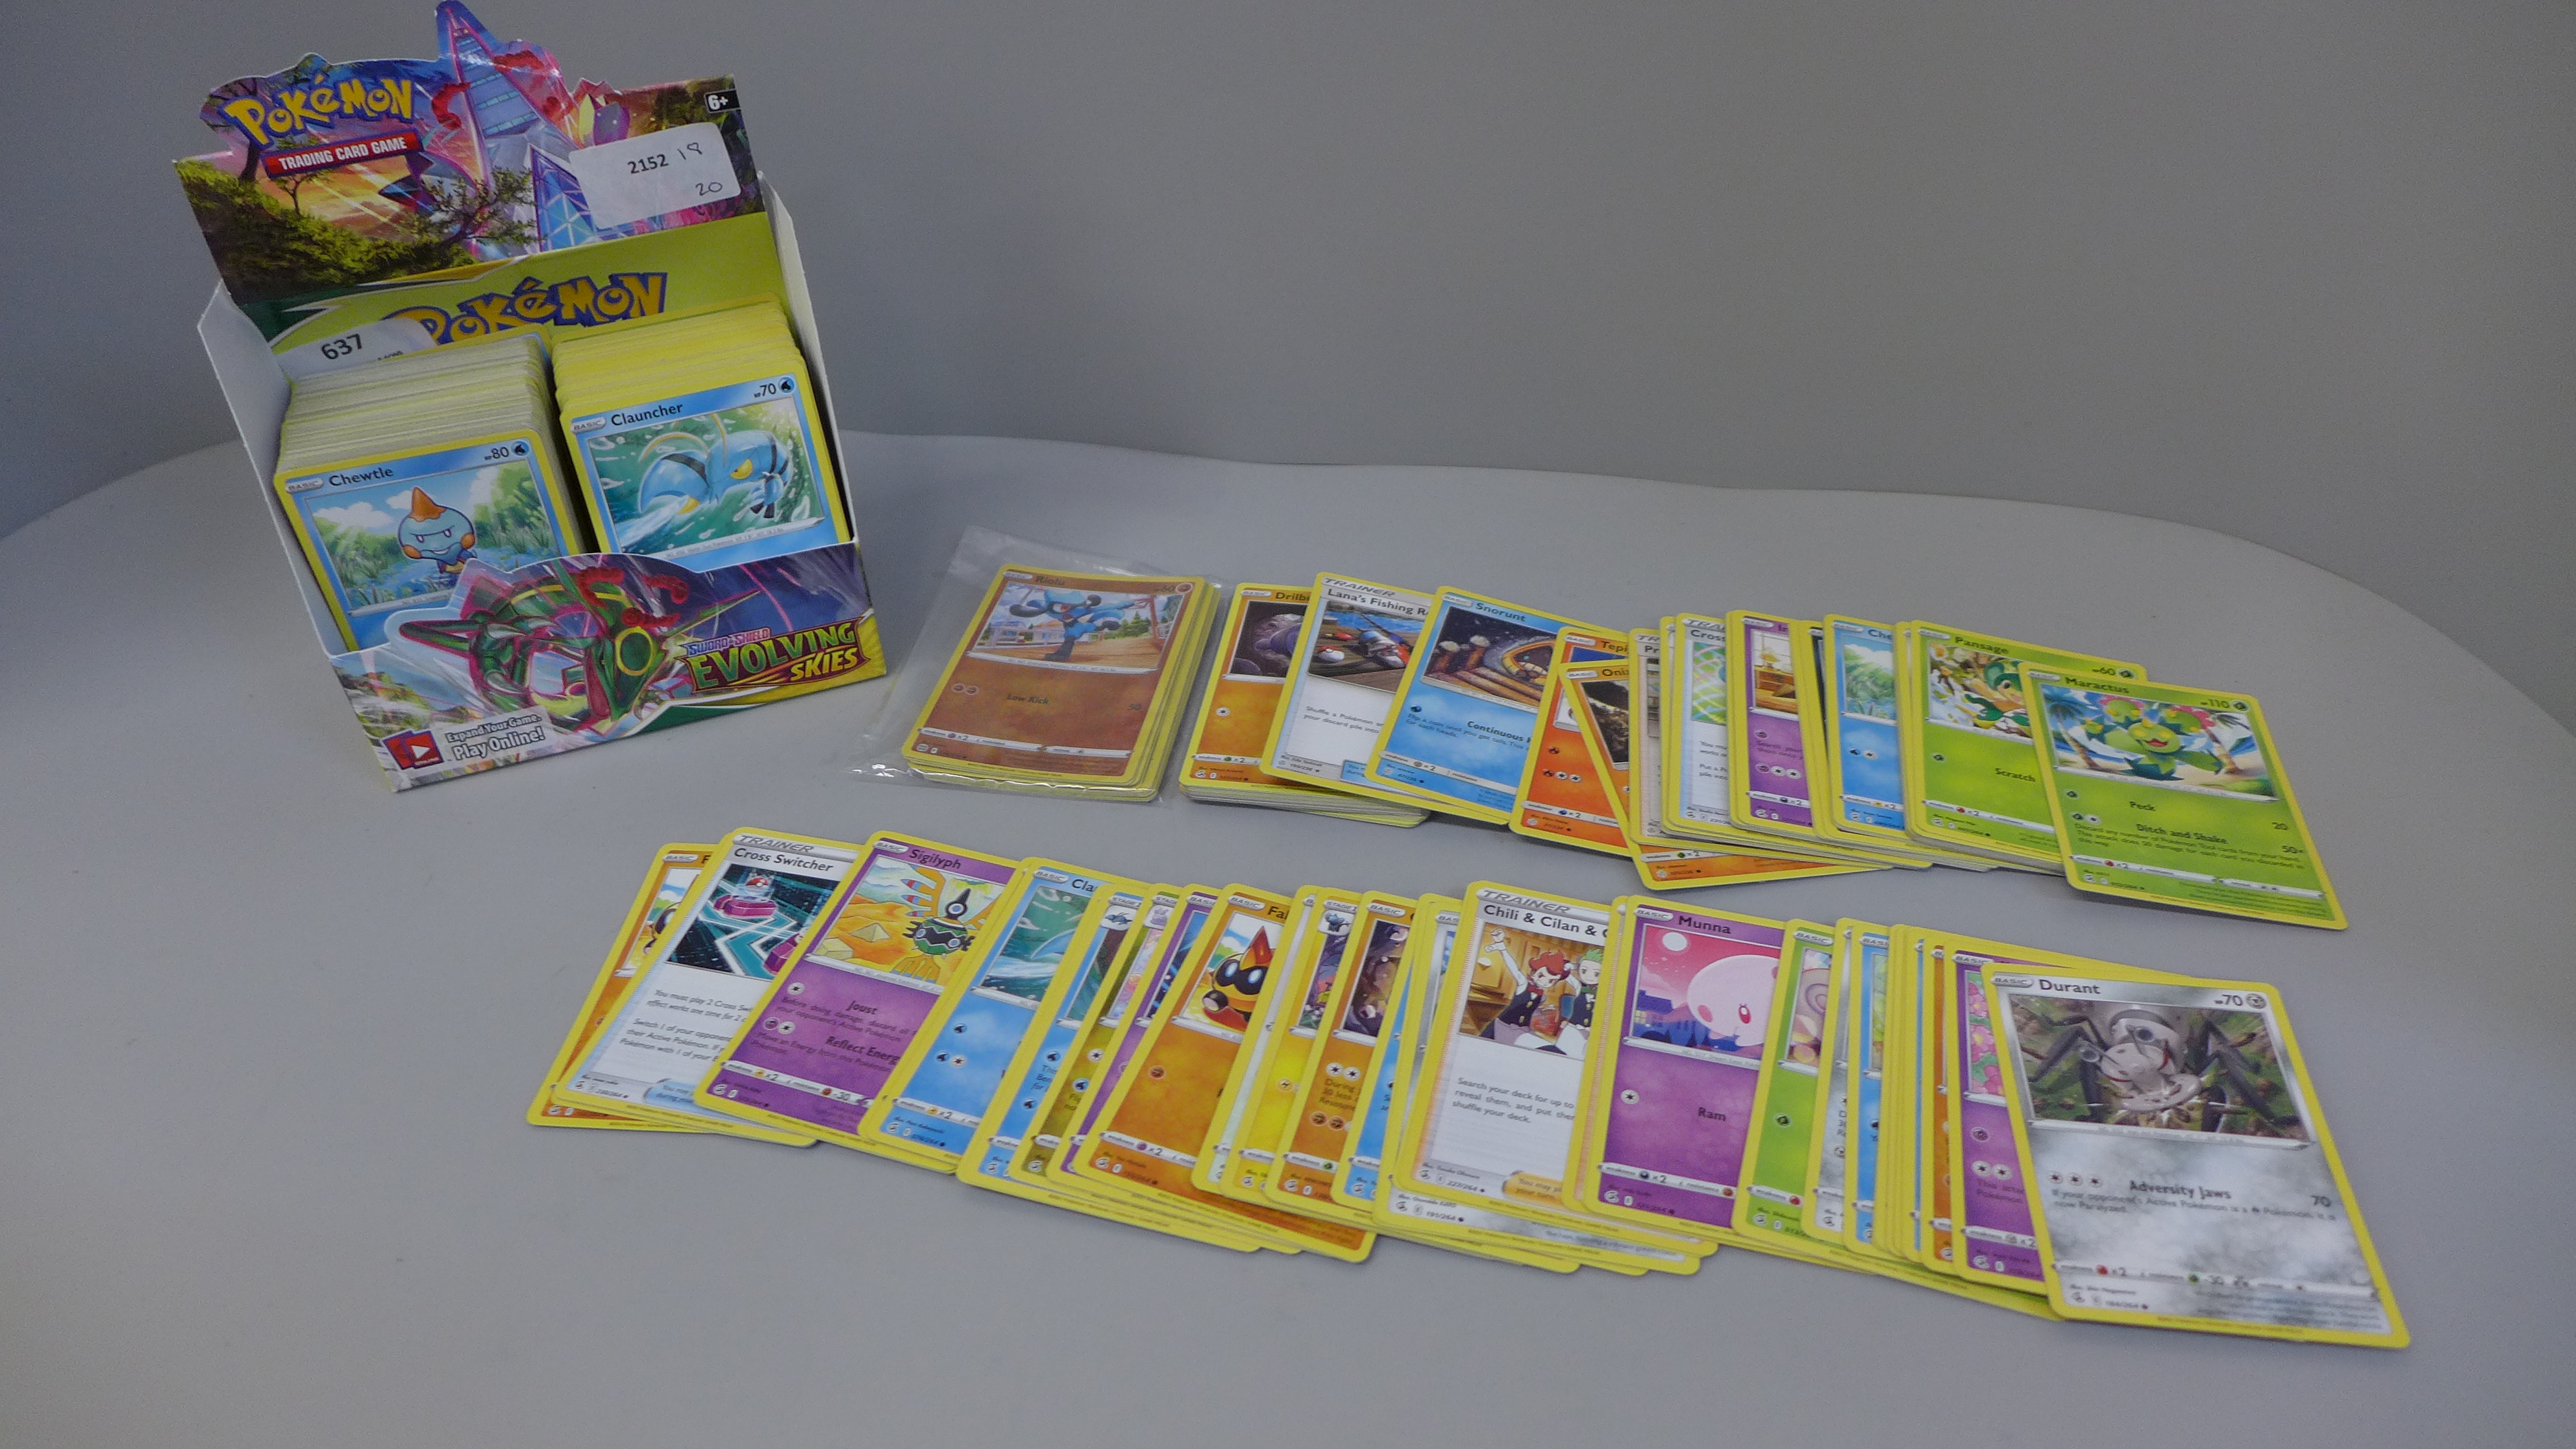 400 Pokemon cards including holographic